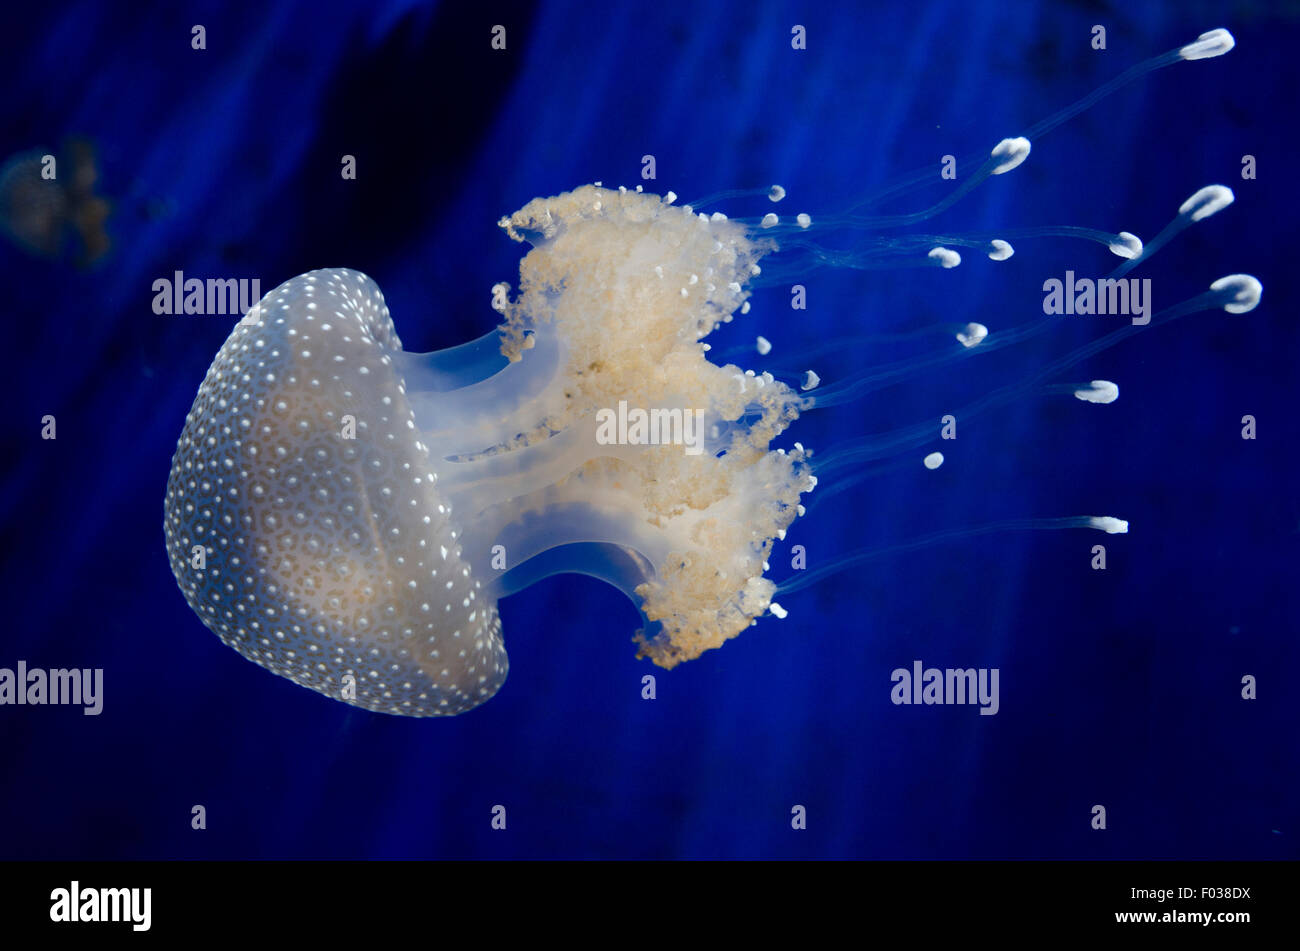 Italy,Liguria,Genoa Aquarium,Phyllorhiza punctata is a species of jellyfish,also known as the floating bell,Australian spotted Stock Photo